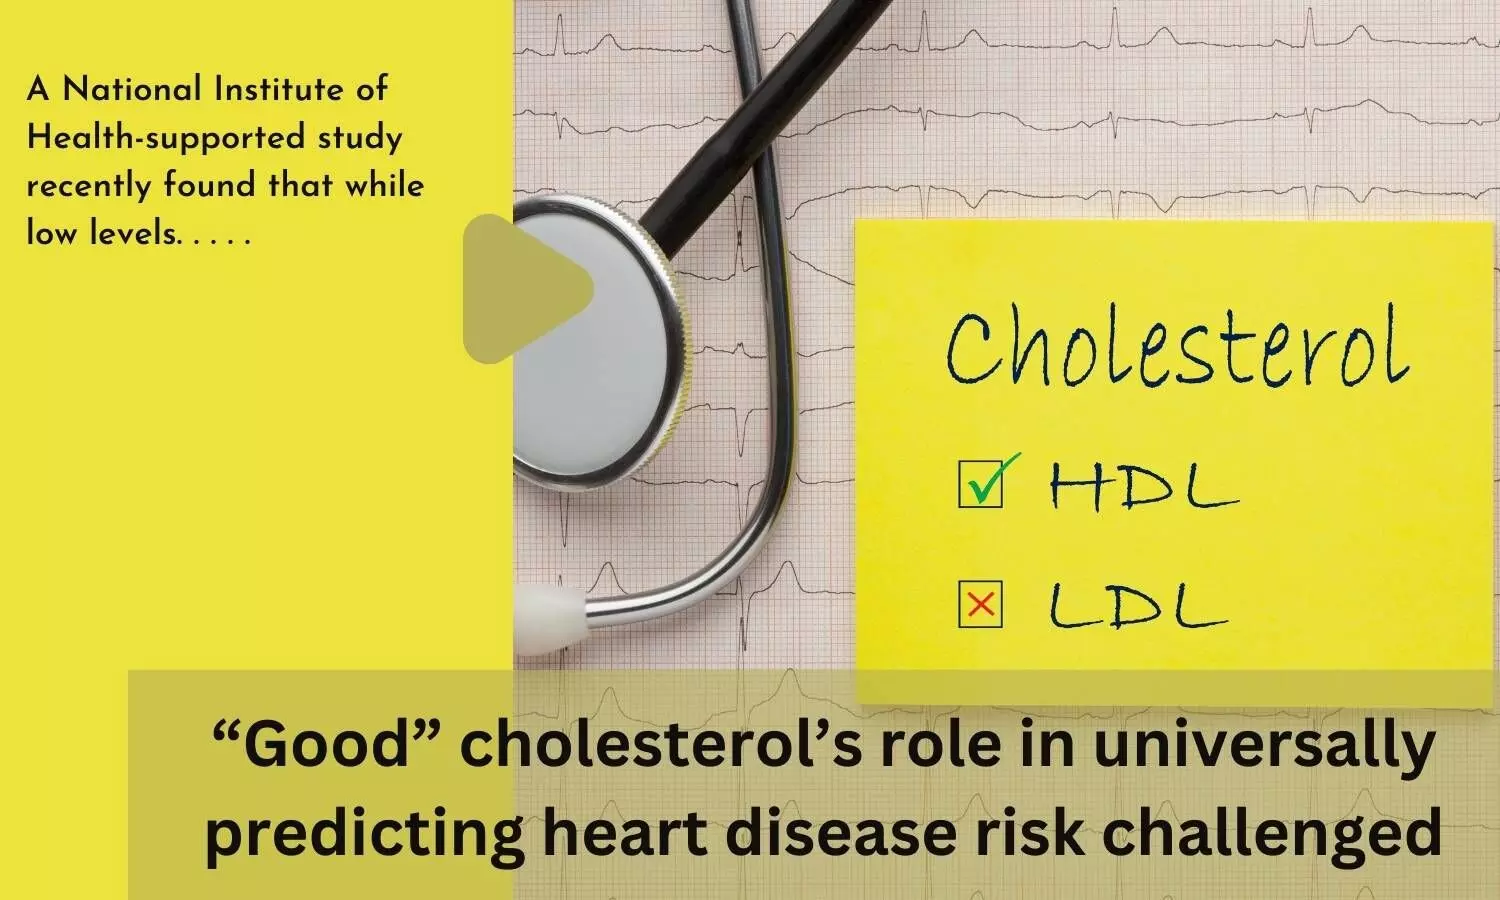 Good cholesterols role in universally predicting heart disease risk challenged